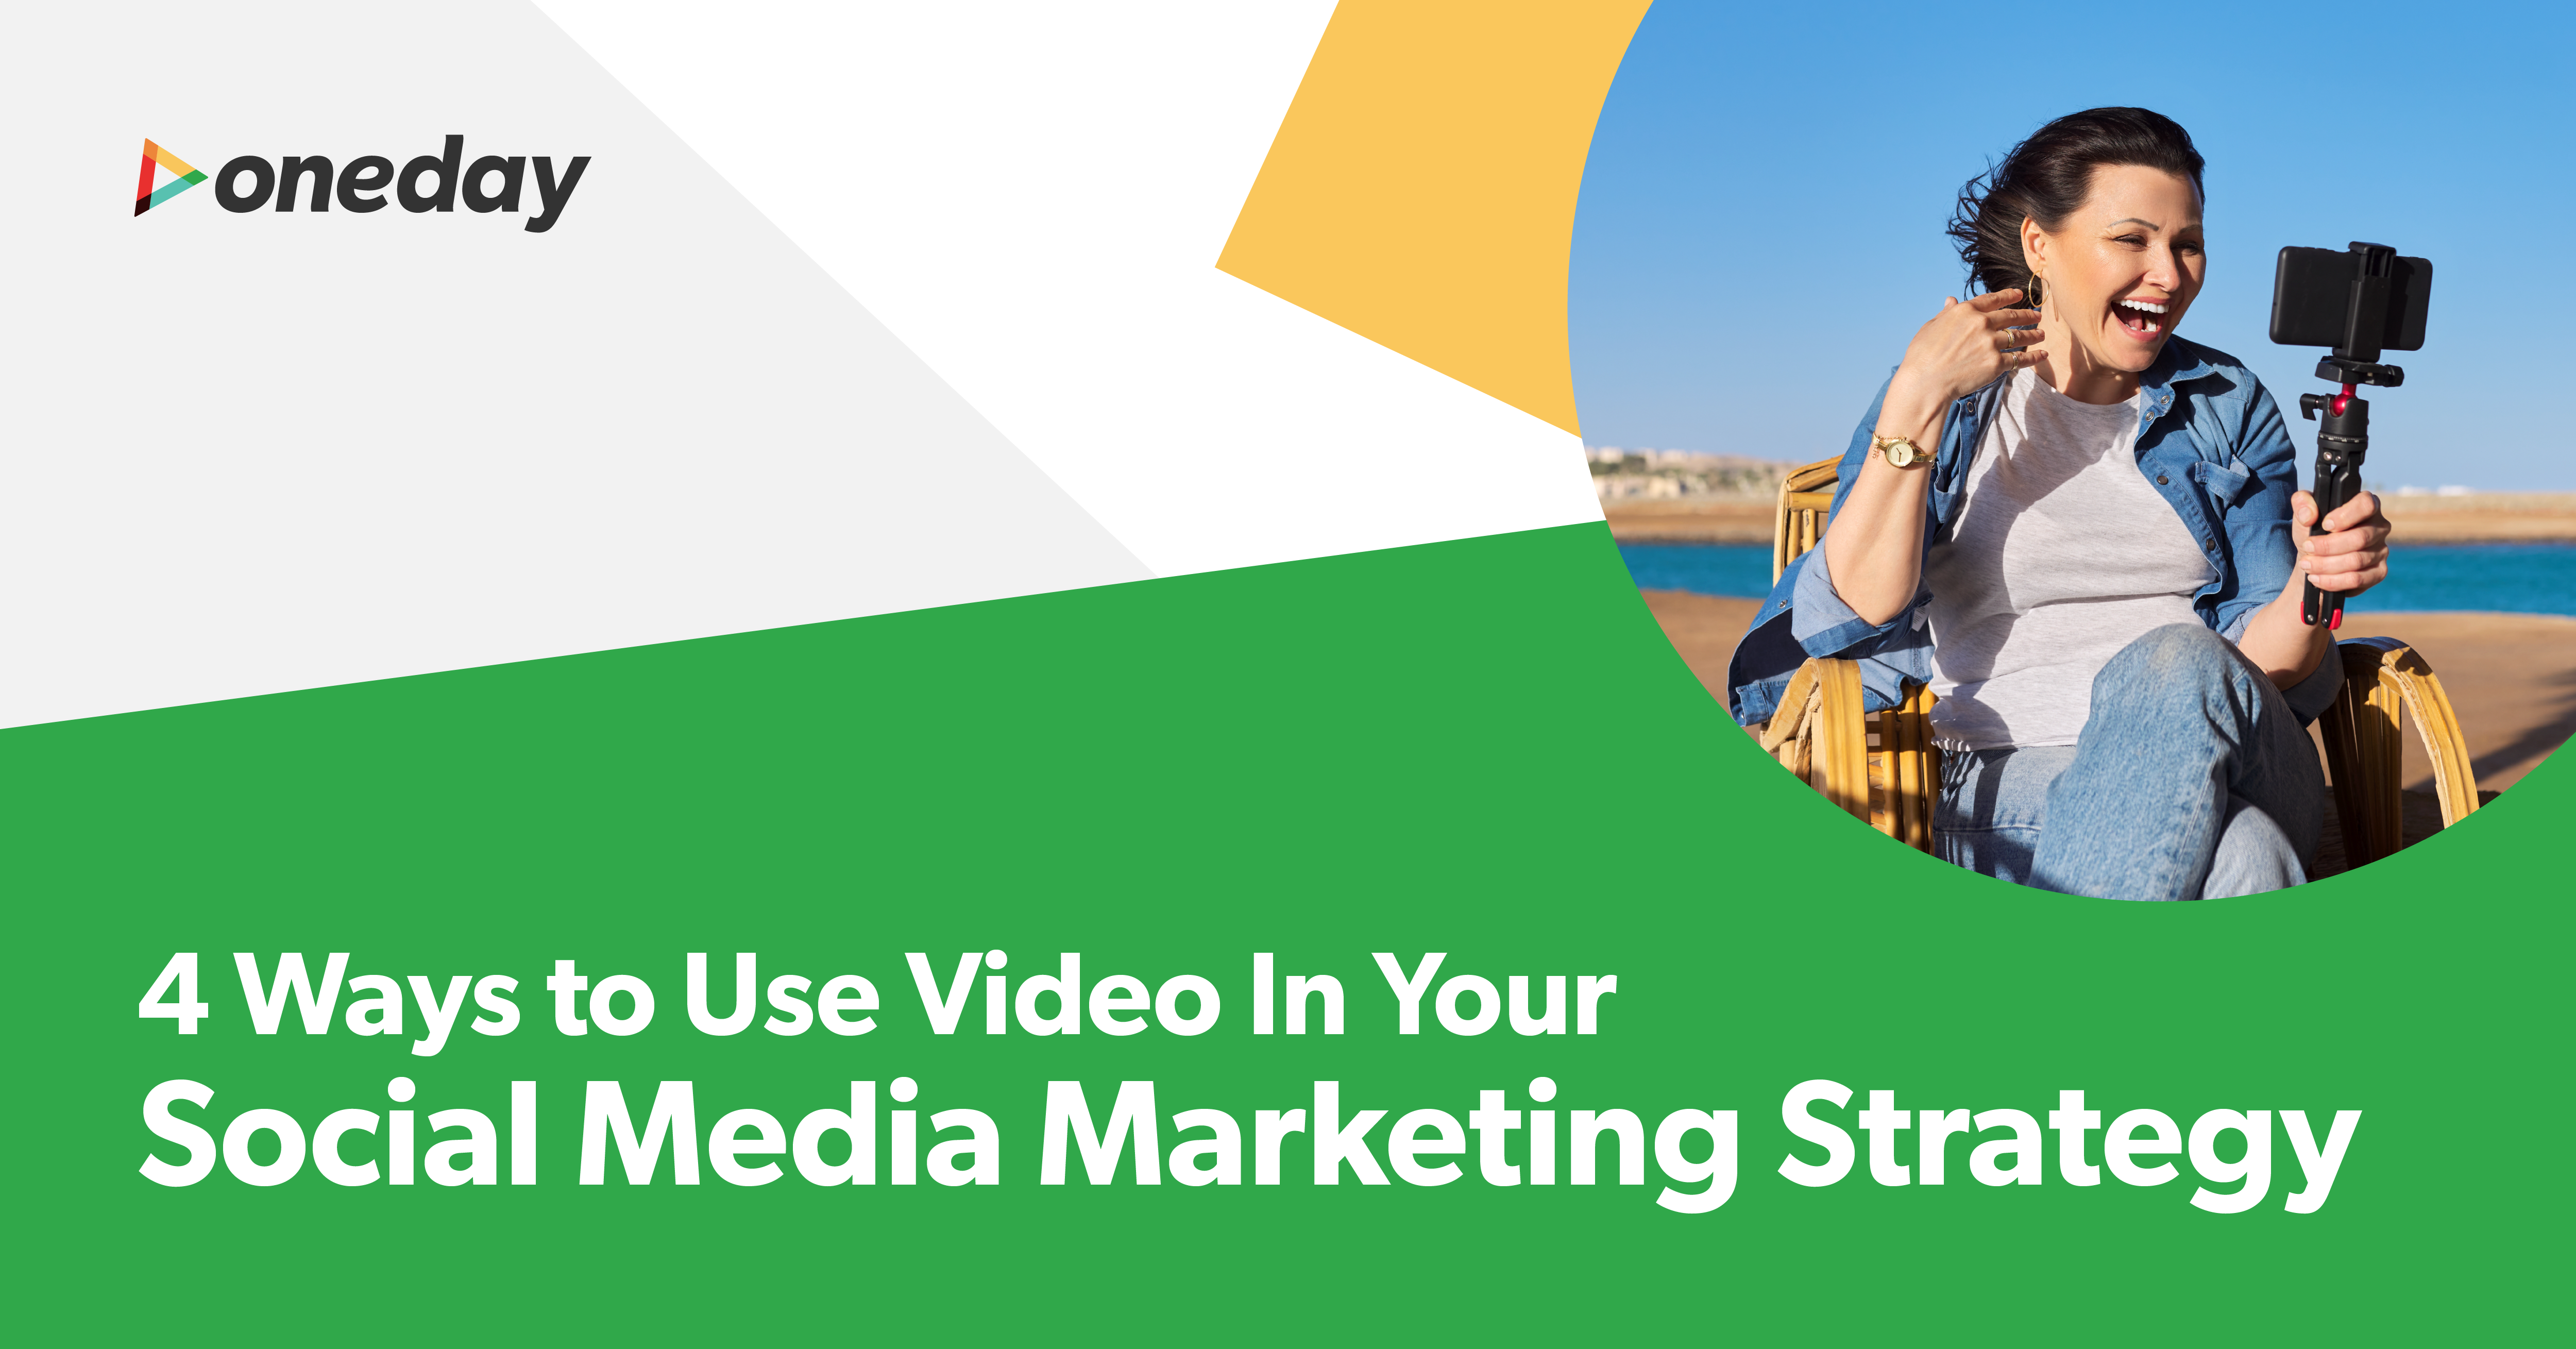 Tips from our video marketing specialists on using video content in your social media strategy to propel your recruiting and prospect messaging to new heights.